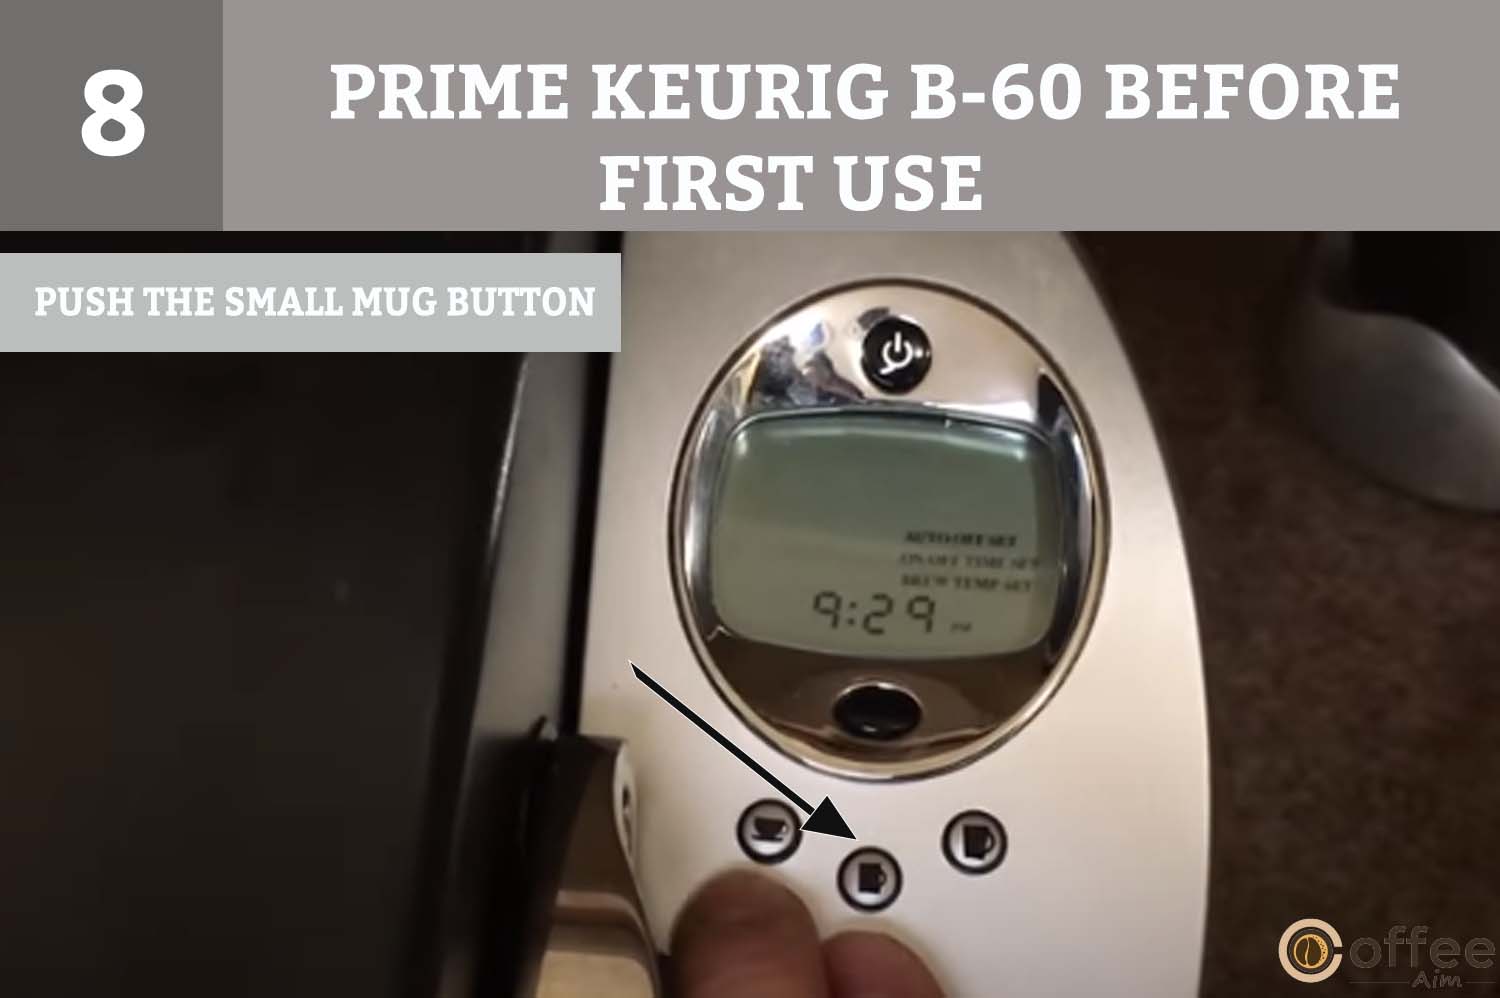 Press the "Small Mug Button" to select a brew size of 7.25 oz.